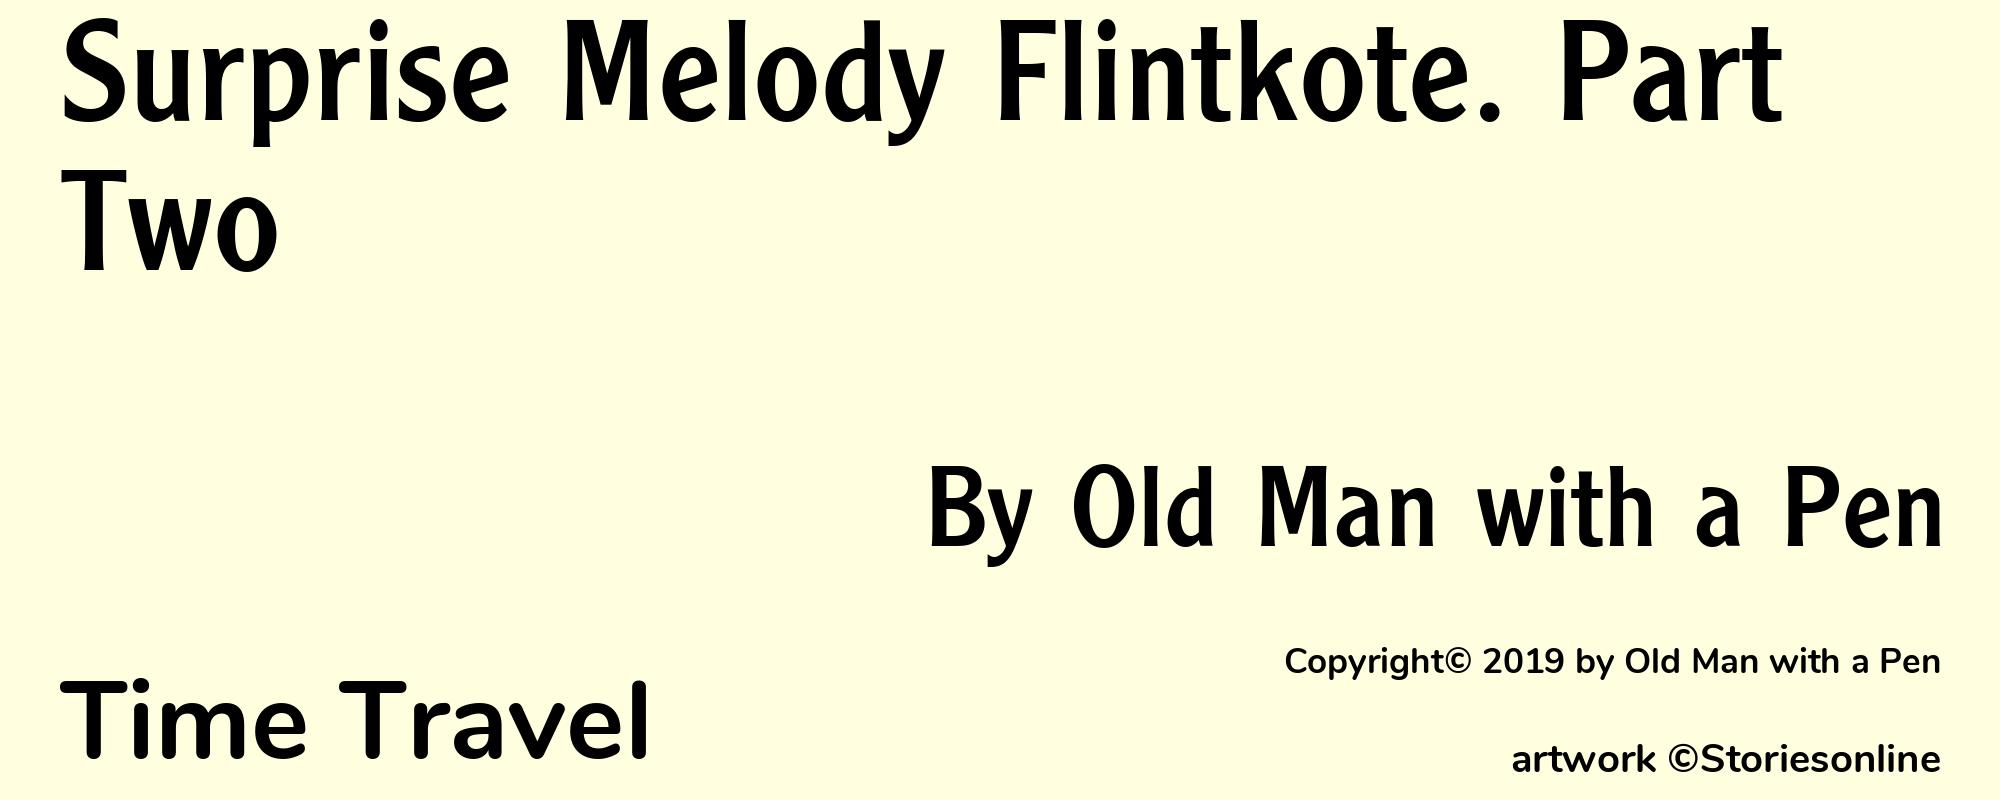 Surprise Melody Flintkote. Part Two - Cover